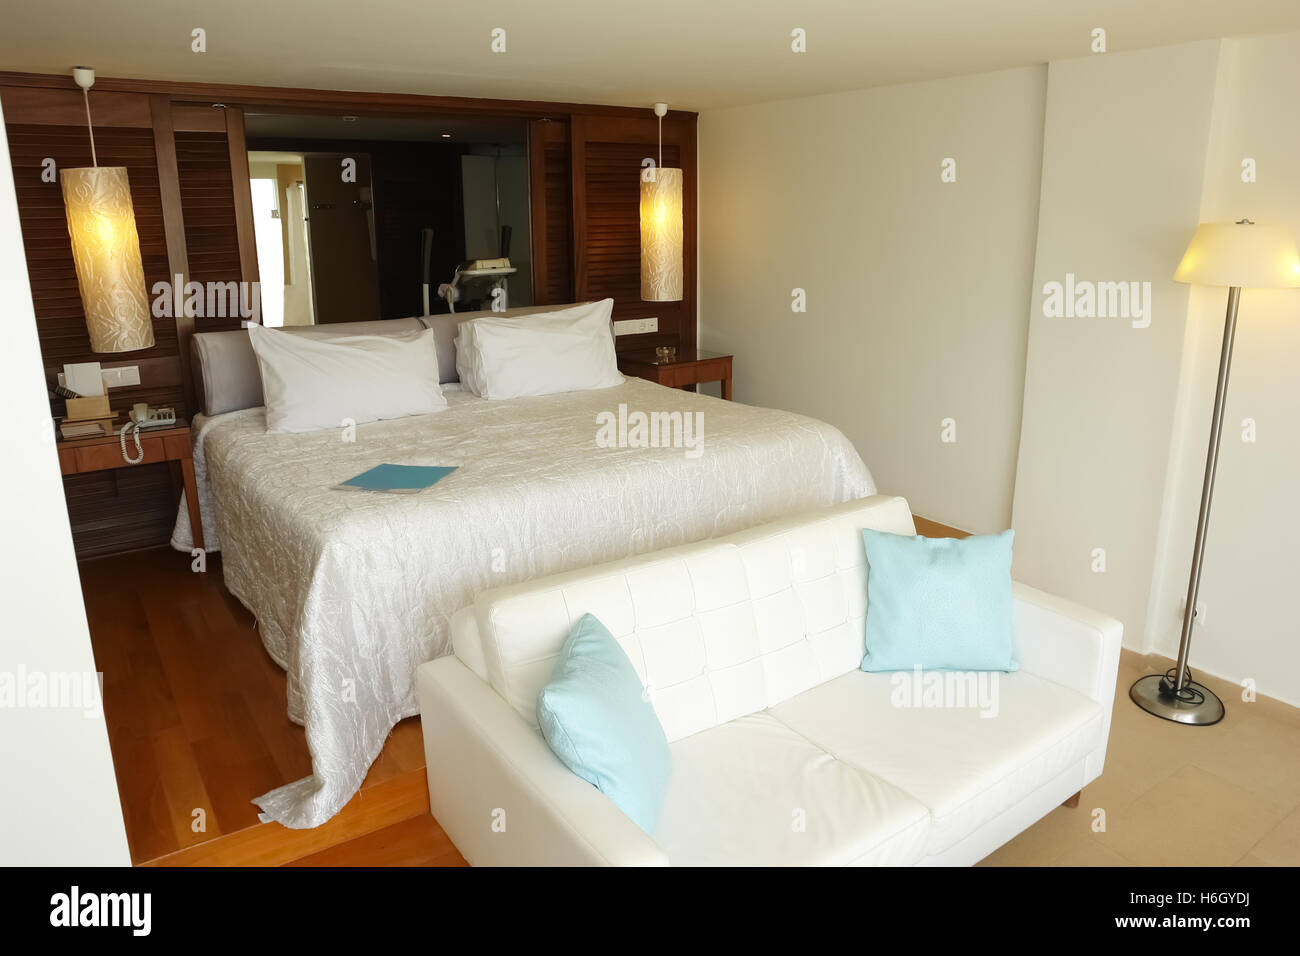 HERAKLION, CRETE, GREECE - MAY 13, 2014: Interior room with big bed and bath in modern building of luxury class hotel Stock Photo